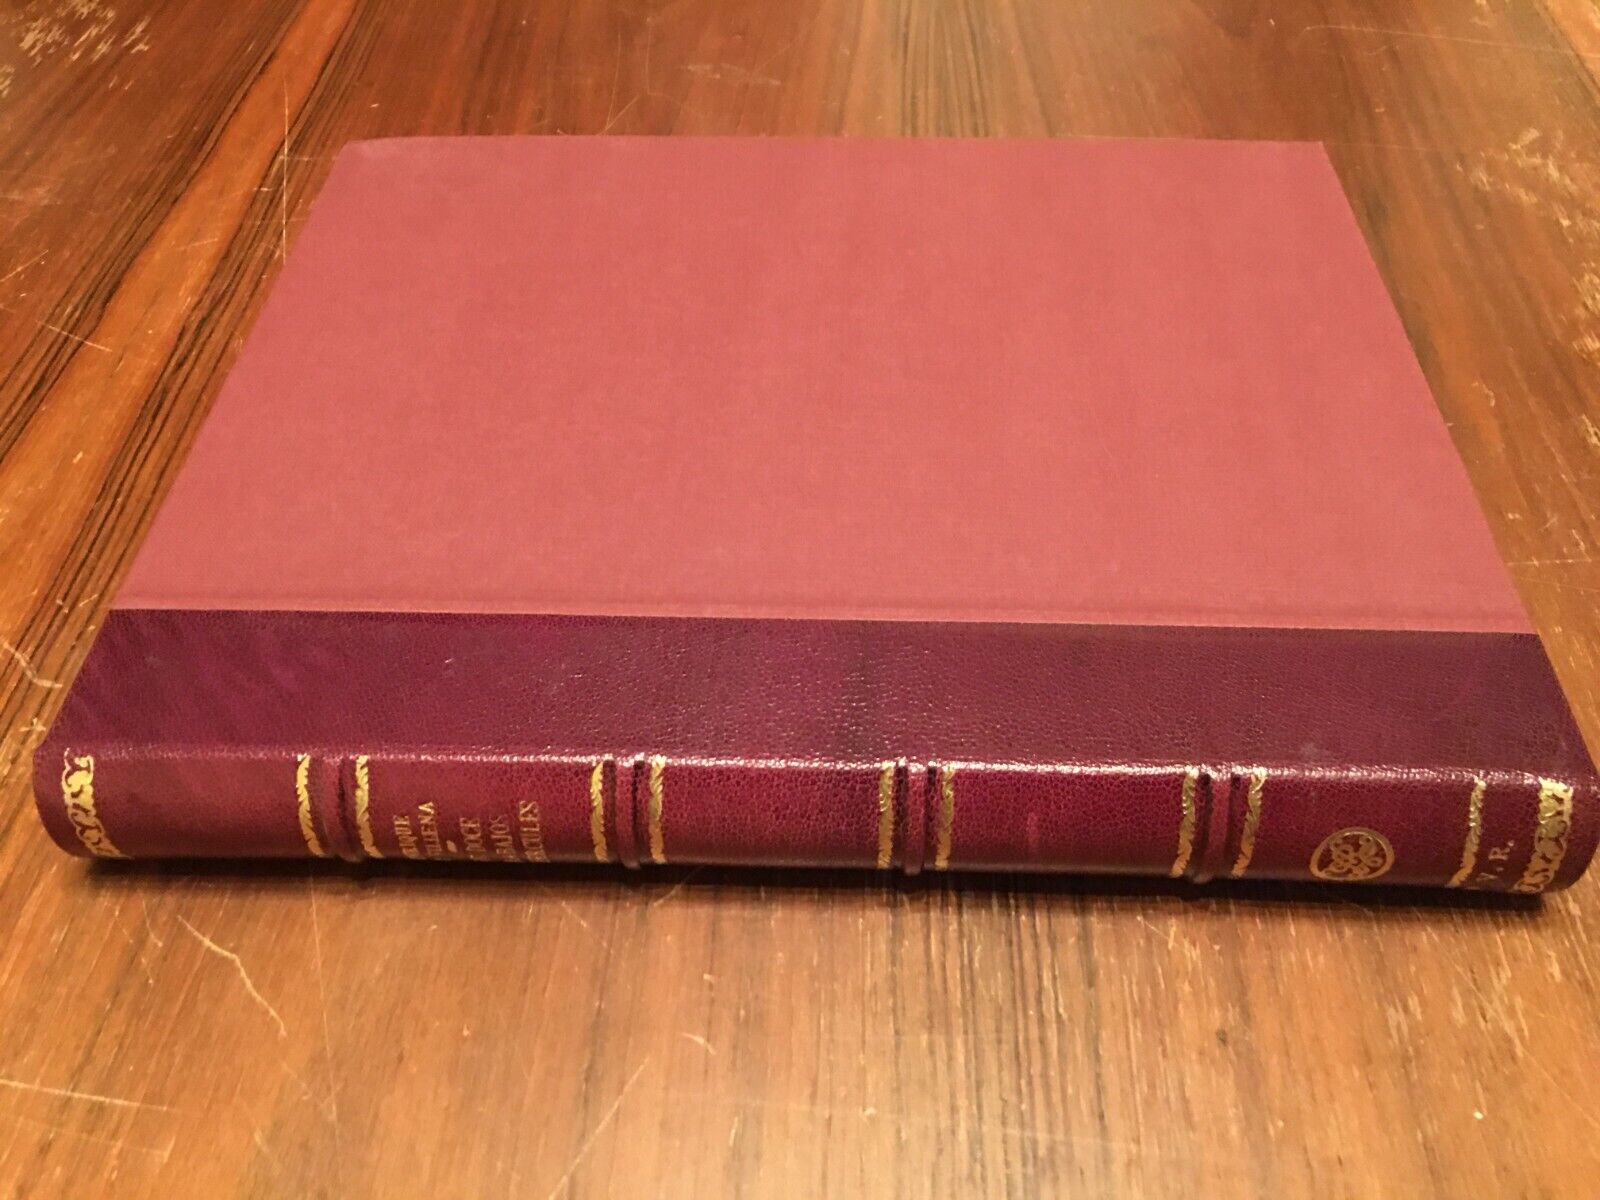 Book - The Doce Work Of Hercules Facsimile Limited Ed. No. 261/3000